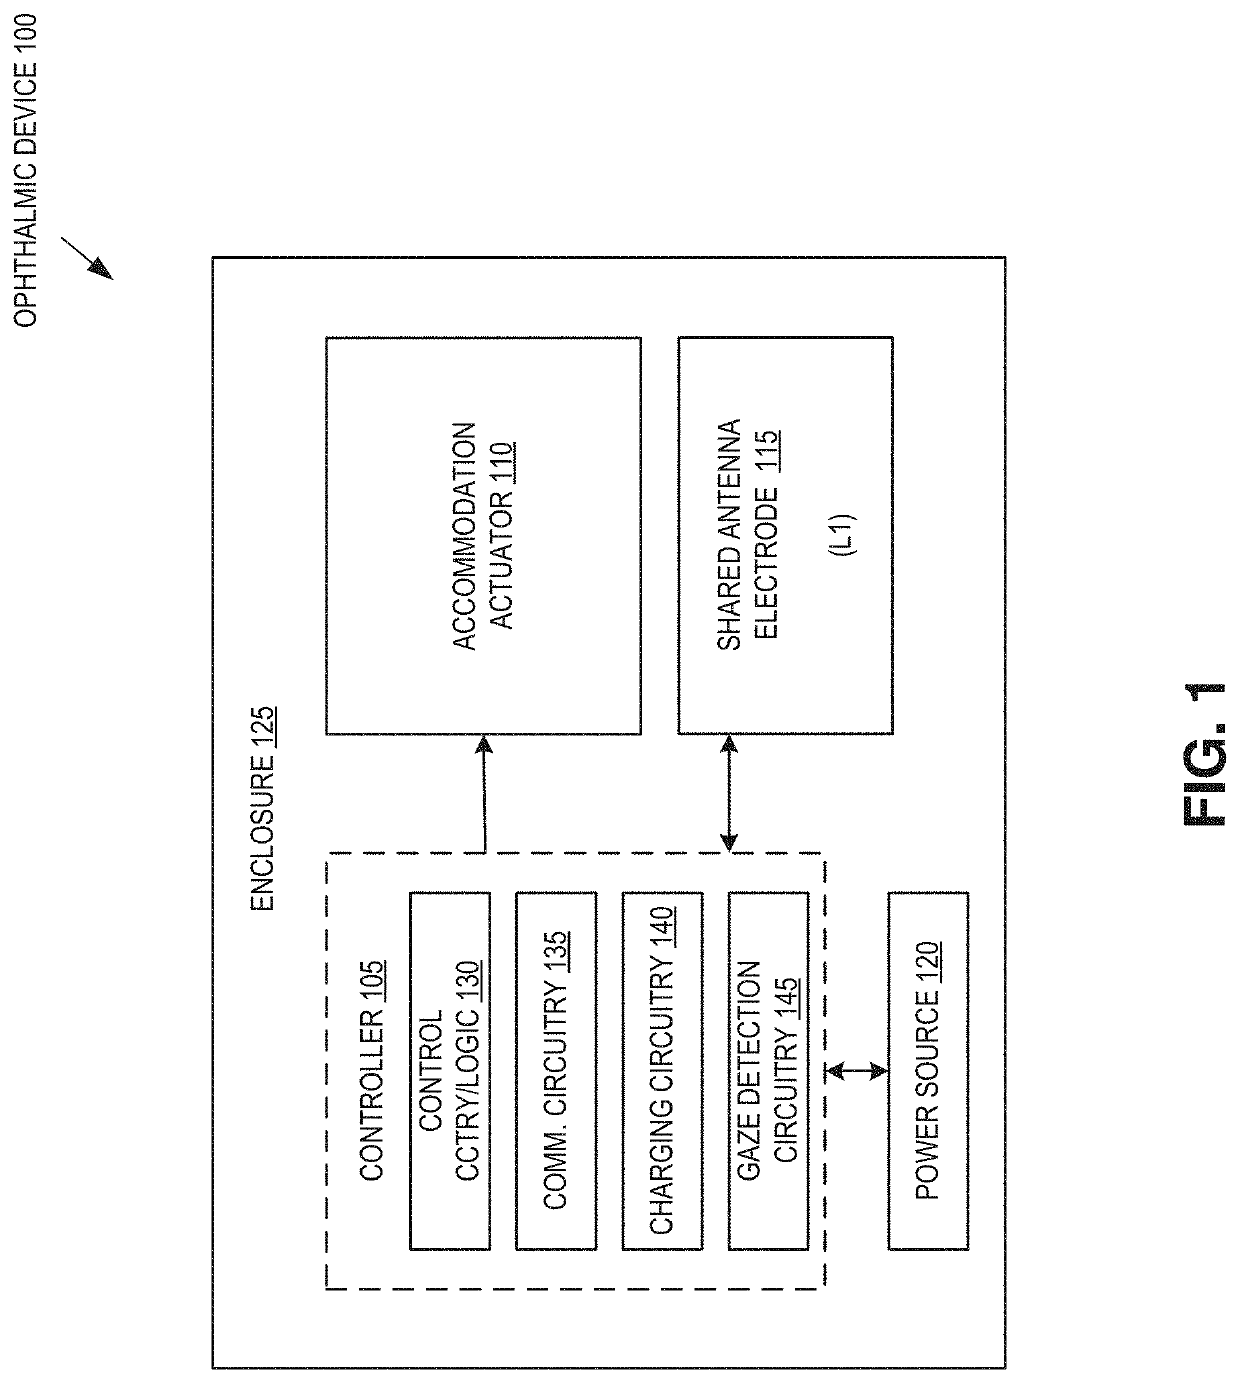 Impedance sensor for ophthalmic device using shared antenna electrode